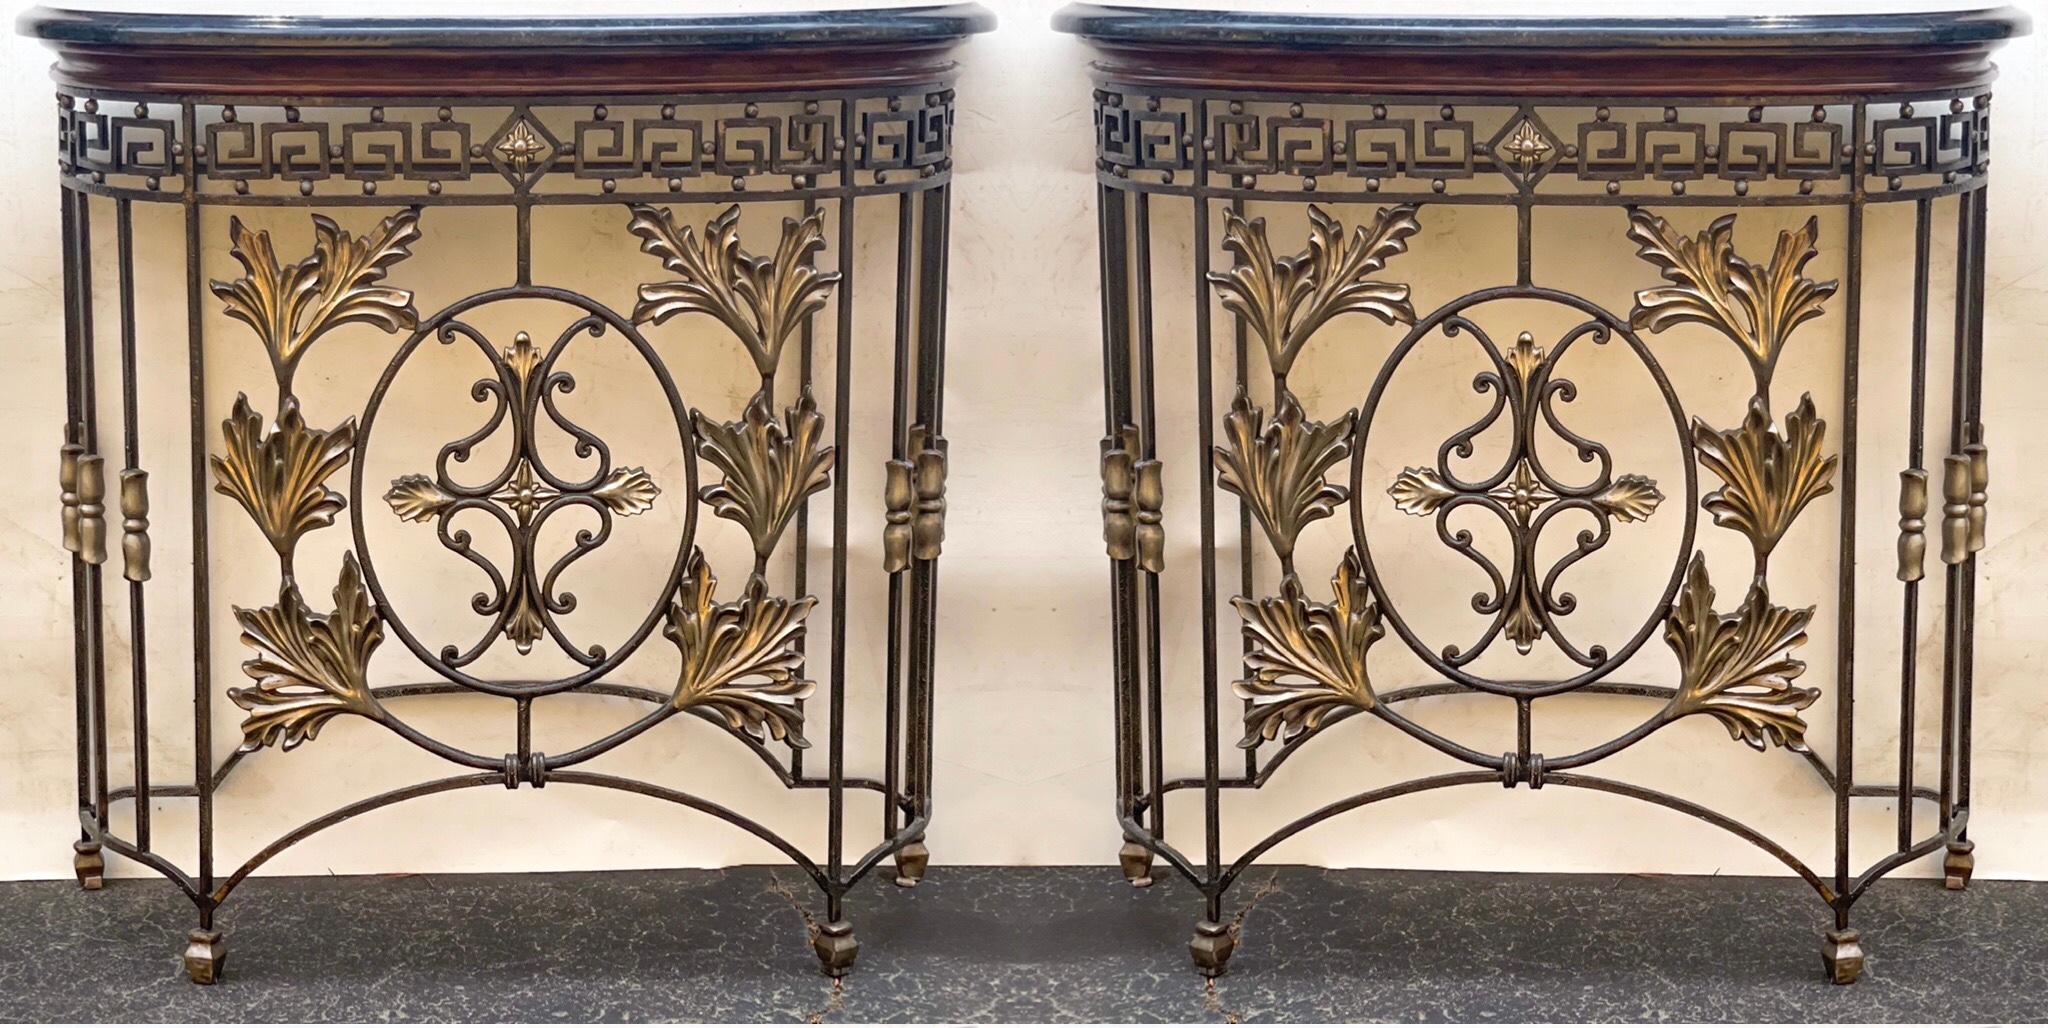 Philippine Neo-Classical Style Iron, Bronze & Marble Console Tables Att. Maitland-Smith -2